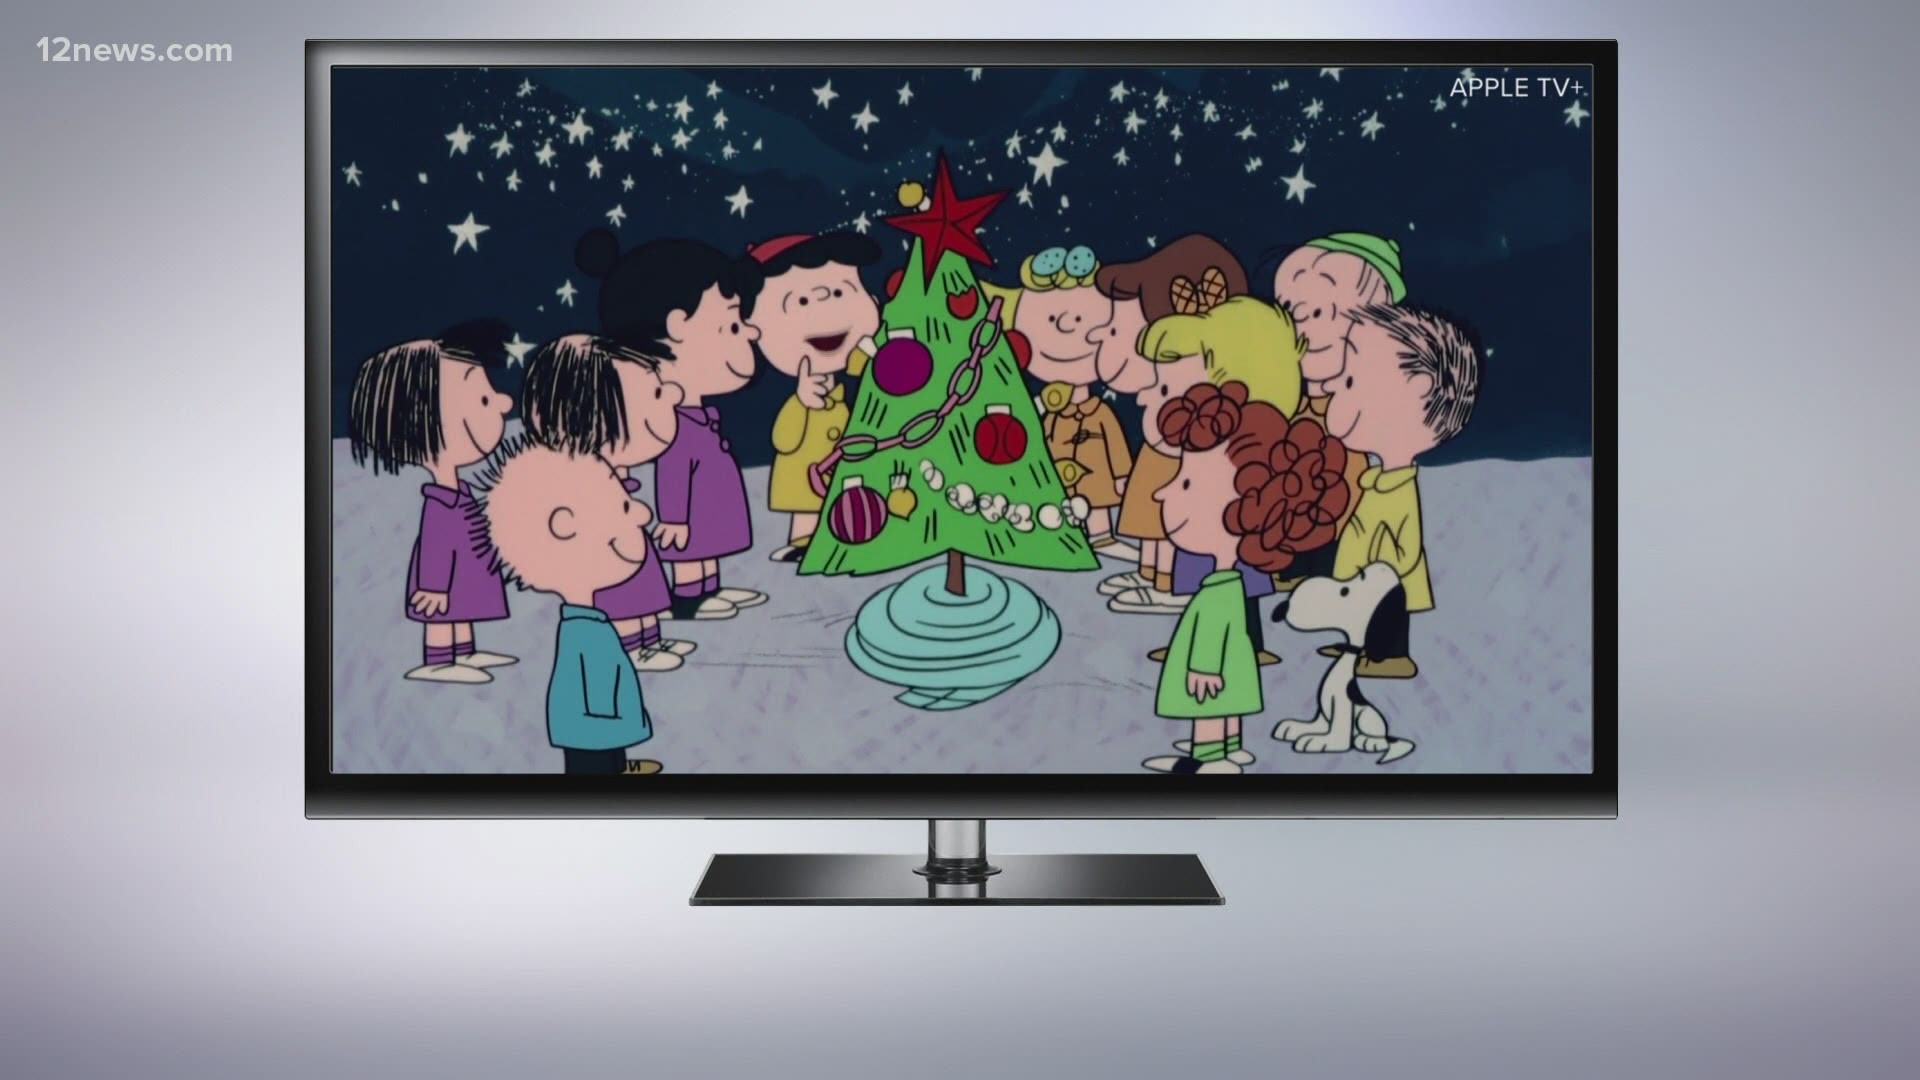 The “Great Pumpkin” never showed on broadcast television this year, but after a deal with PBS, the Charlie Brown Thanksgiving and Christmas specials will return.